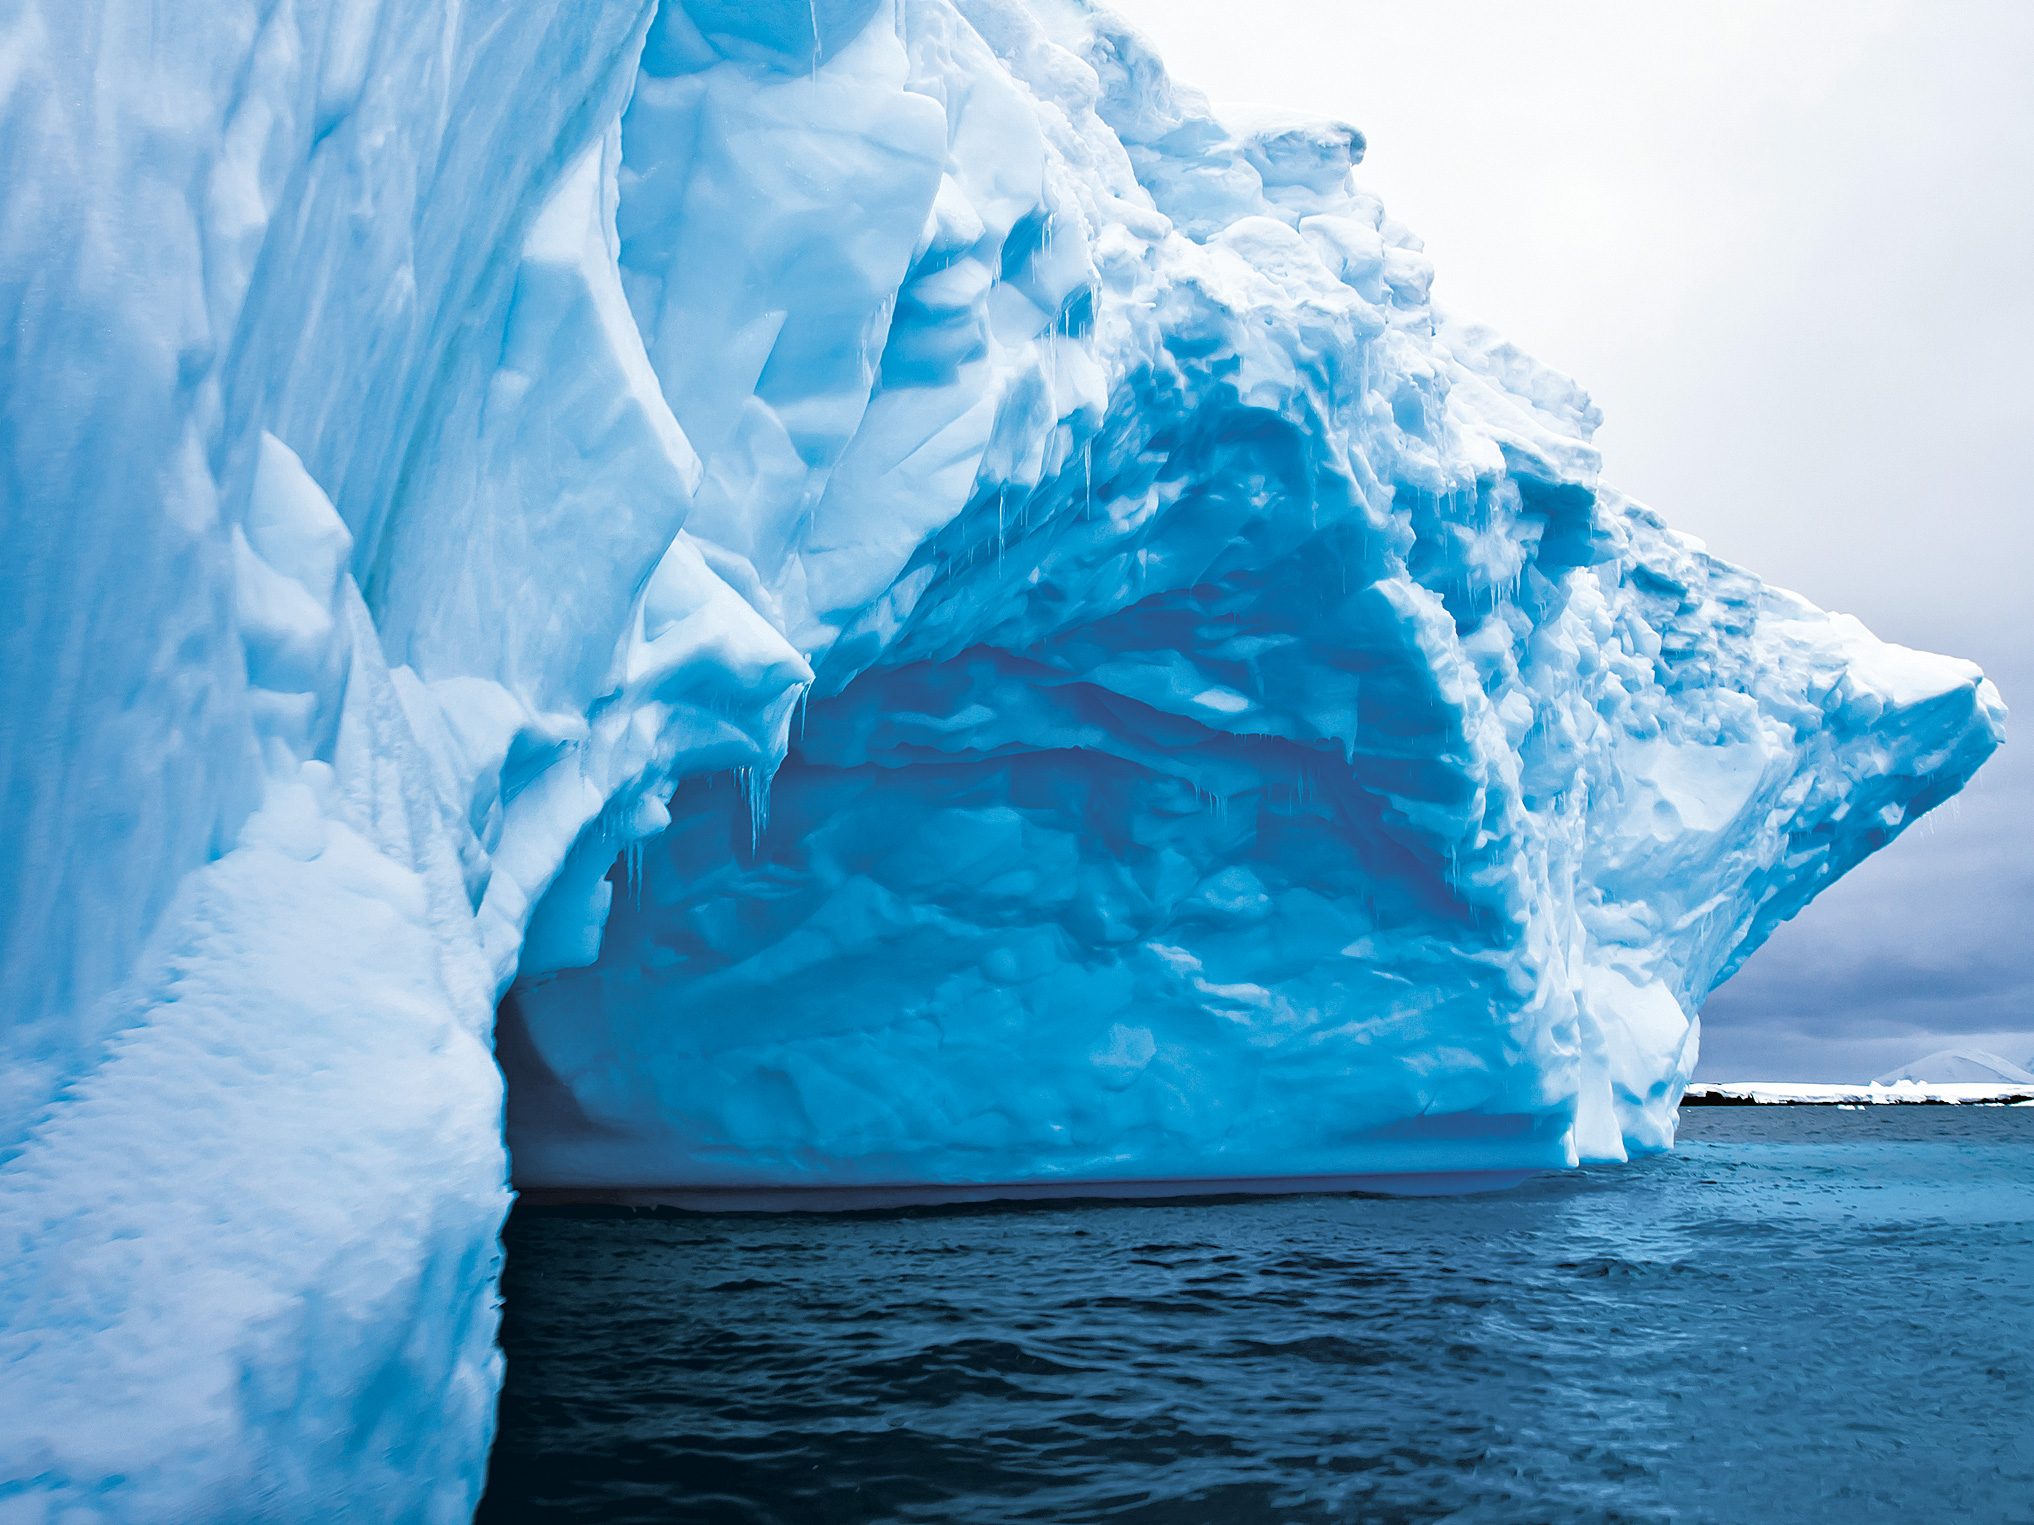 Antarctica: A Dreamy, Implausible Idea of a Place